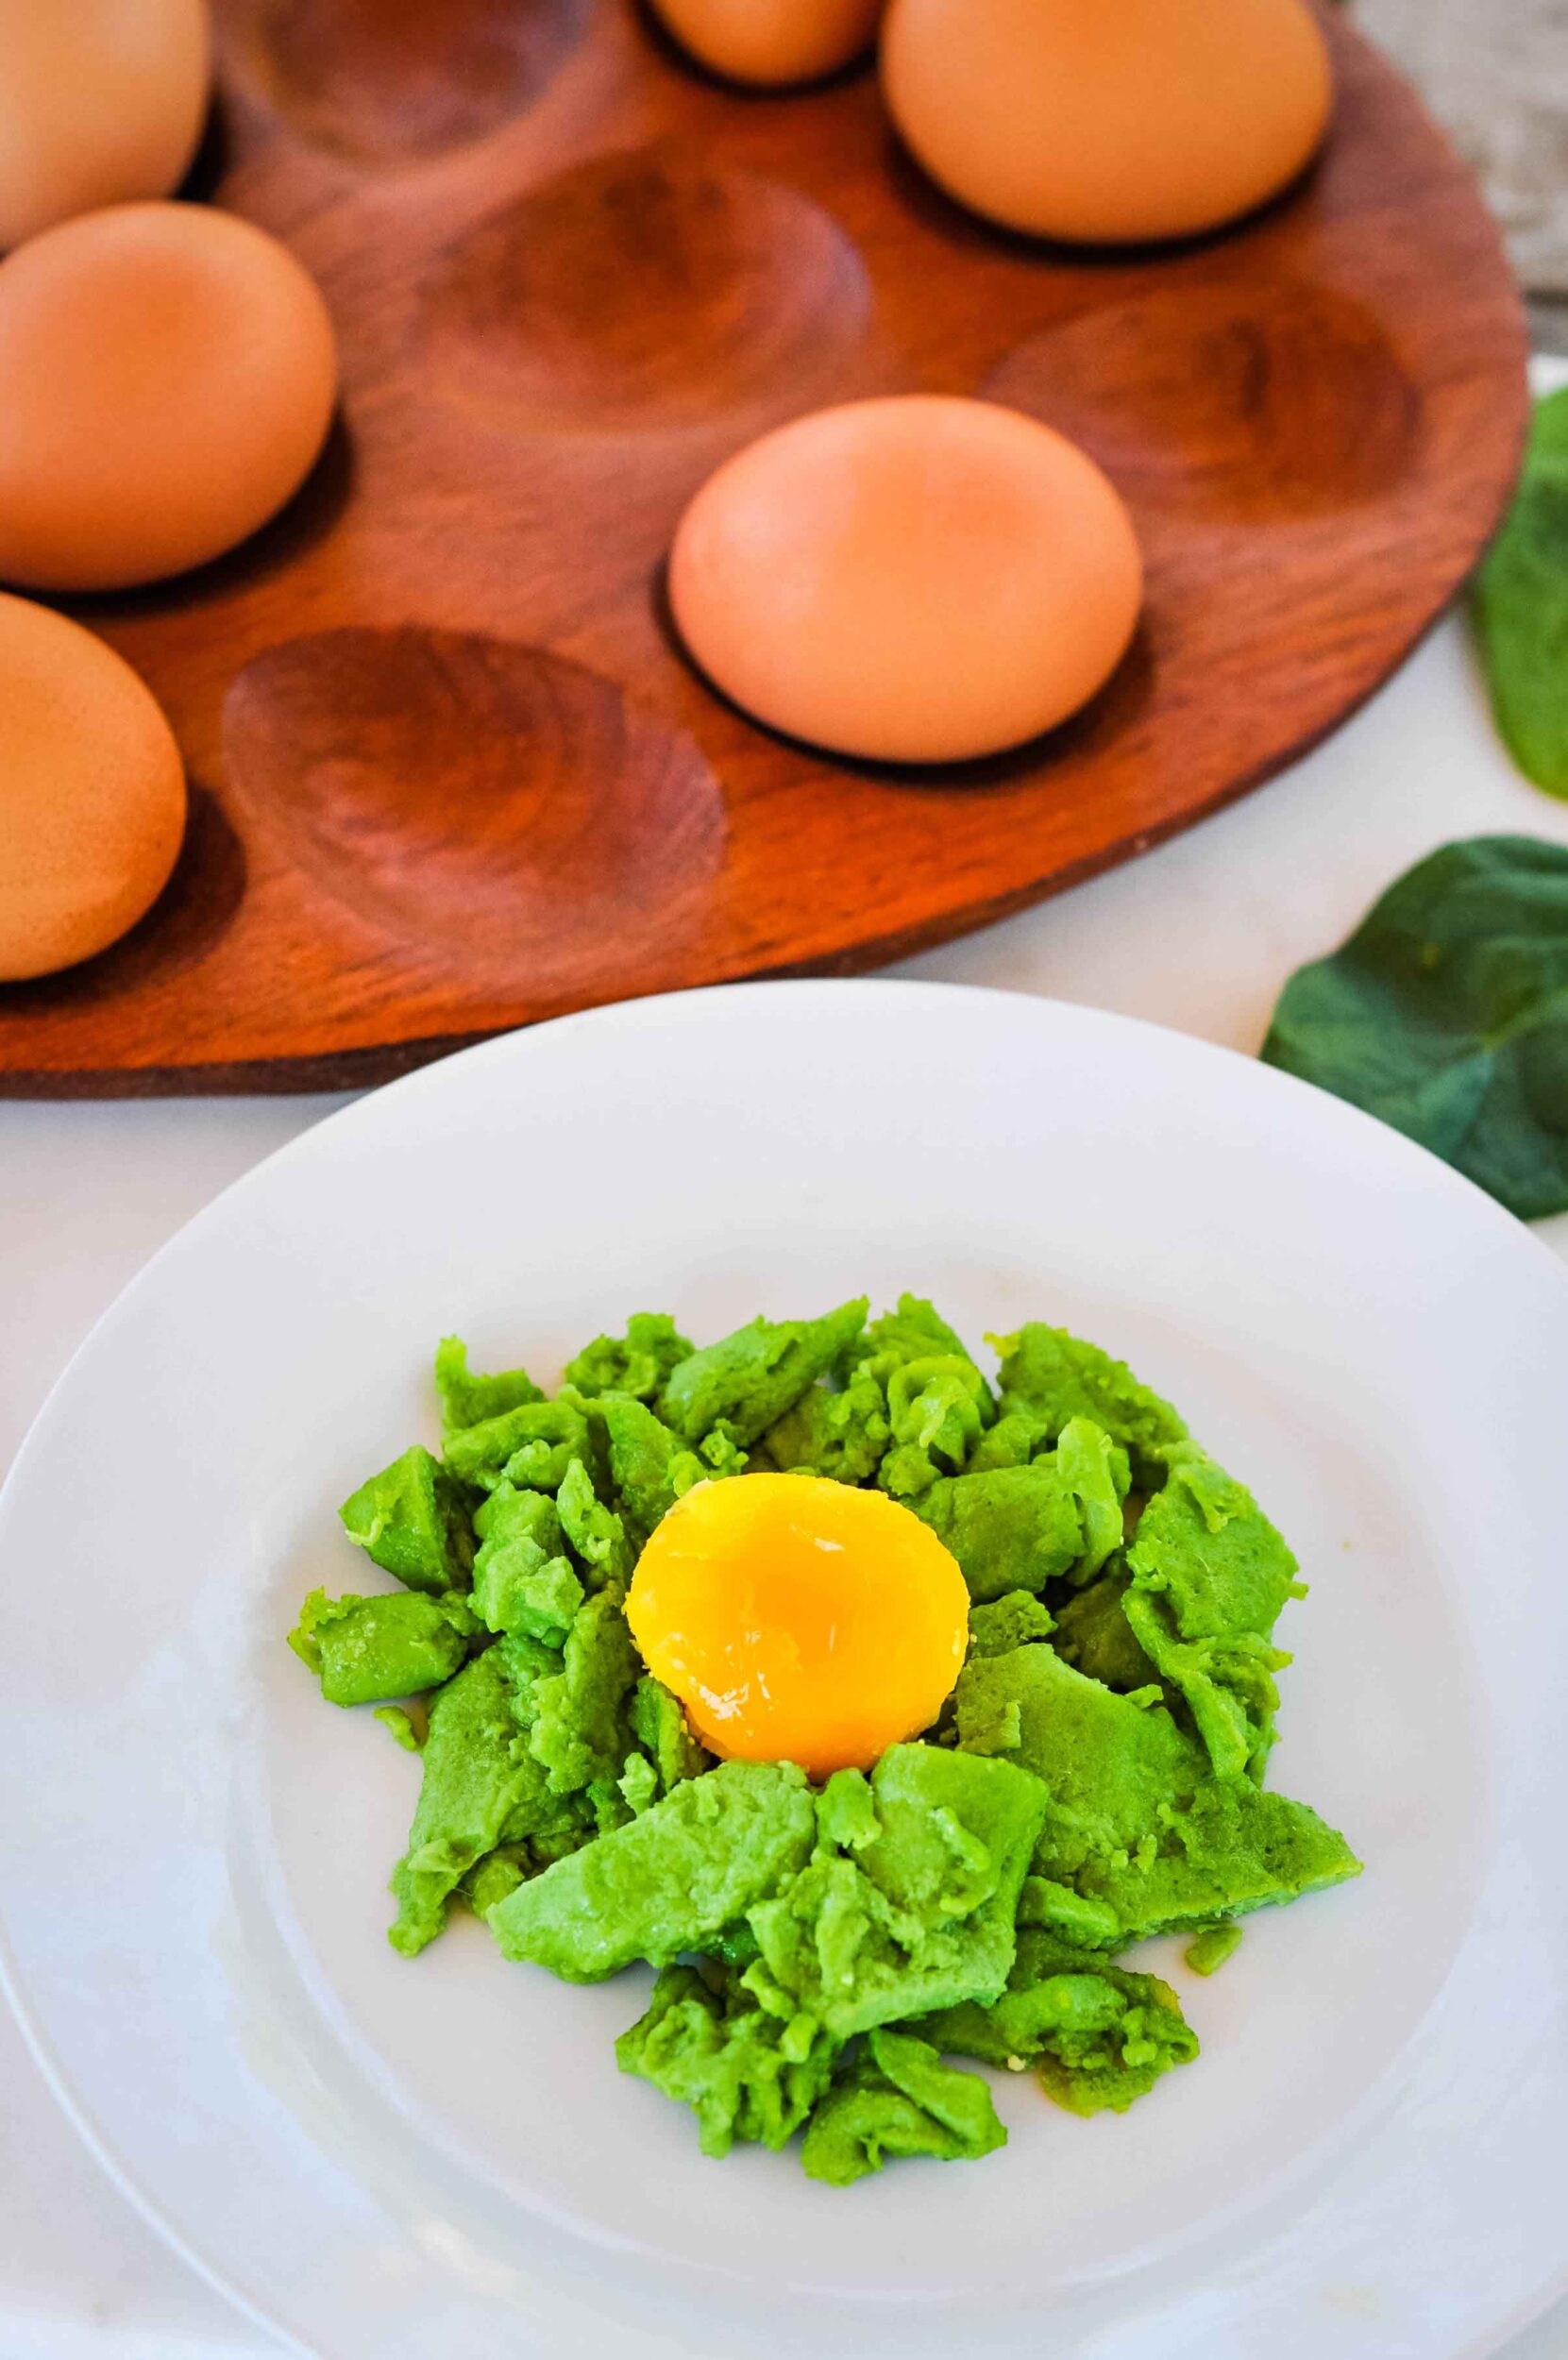 Green eggs served with bacon.